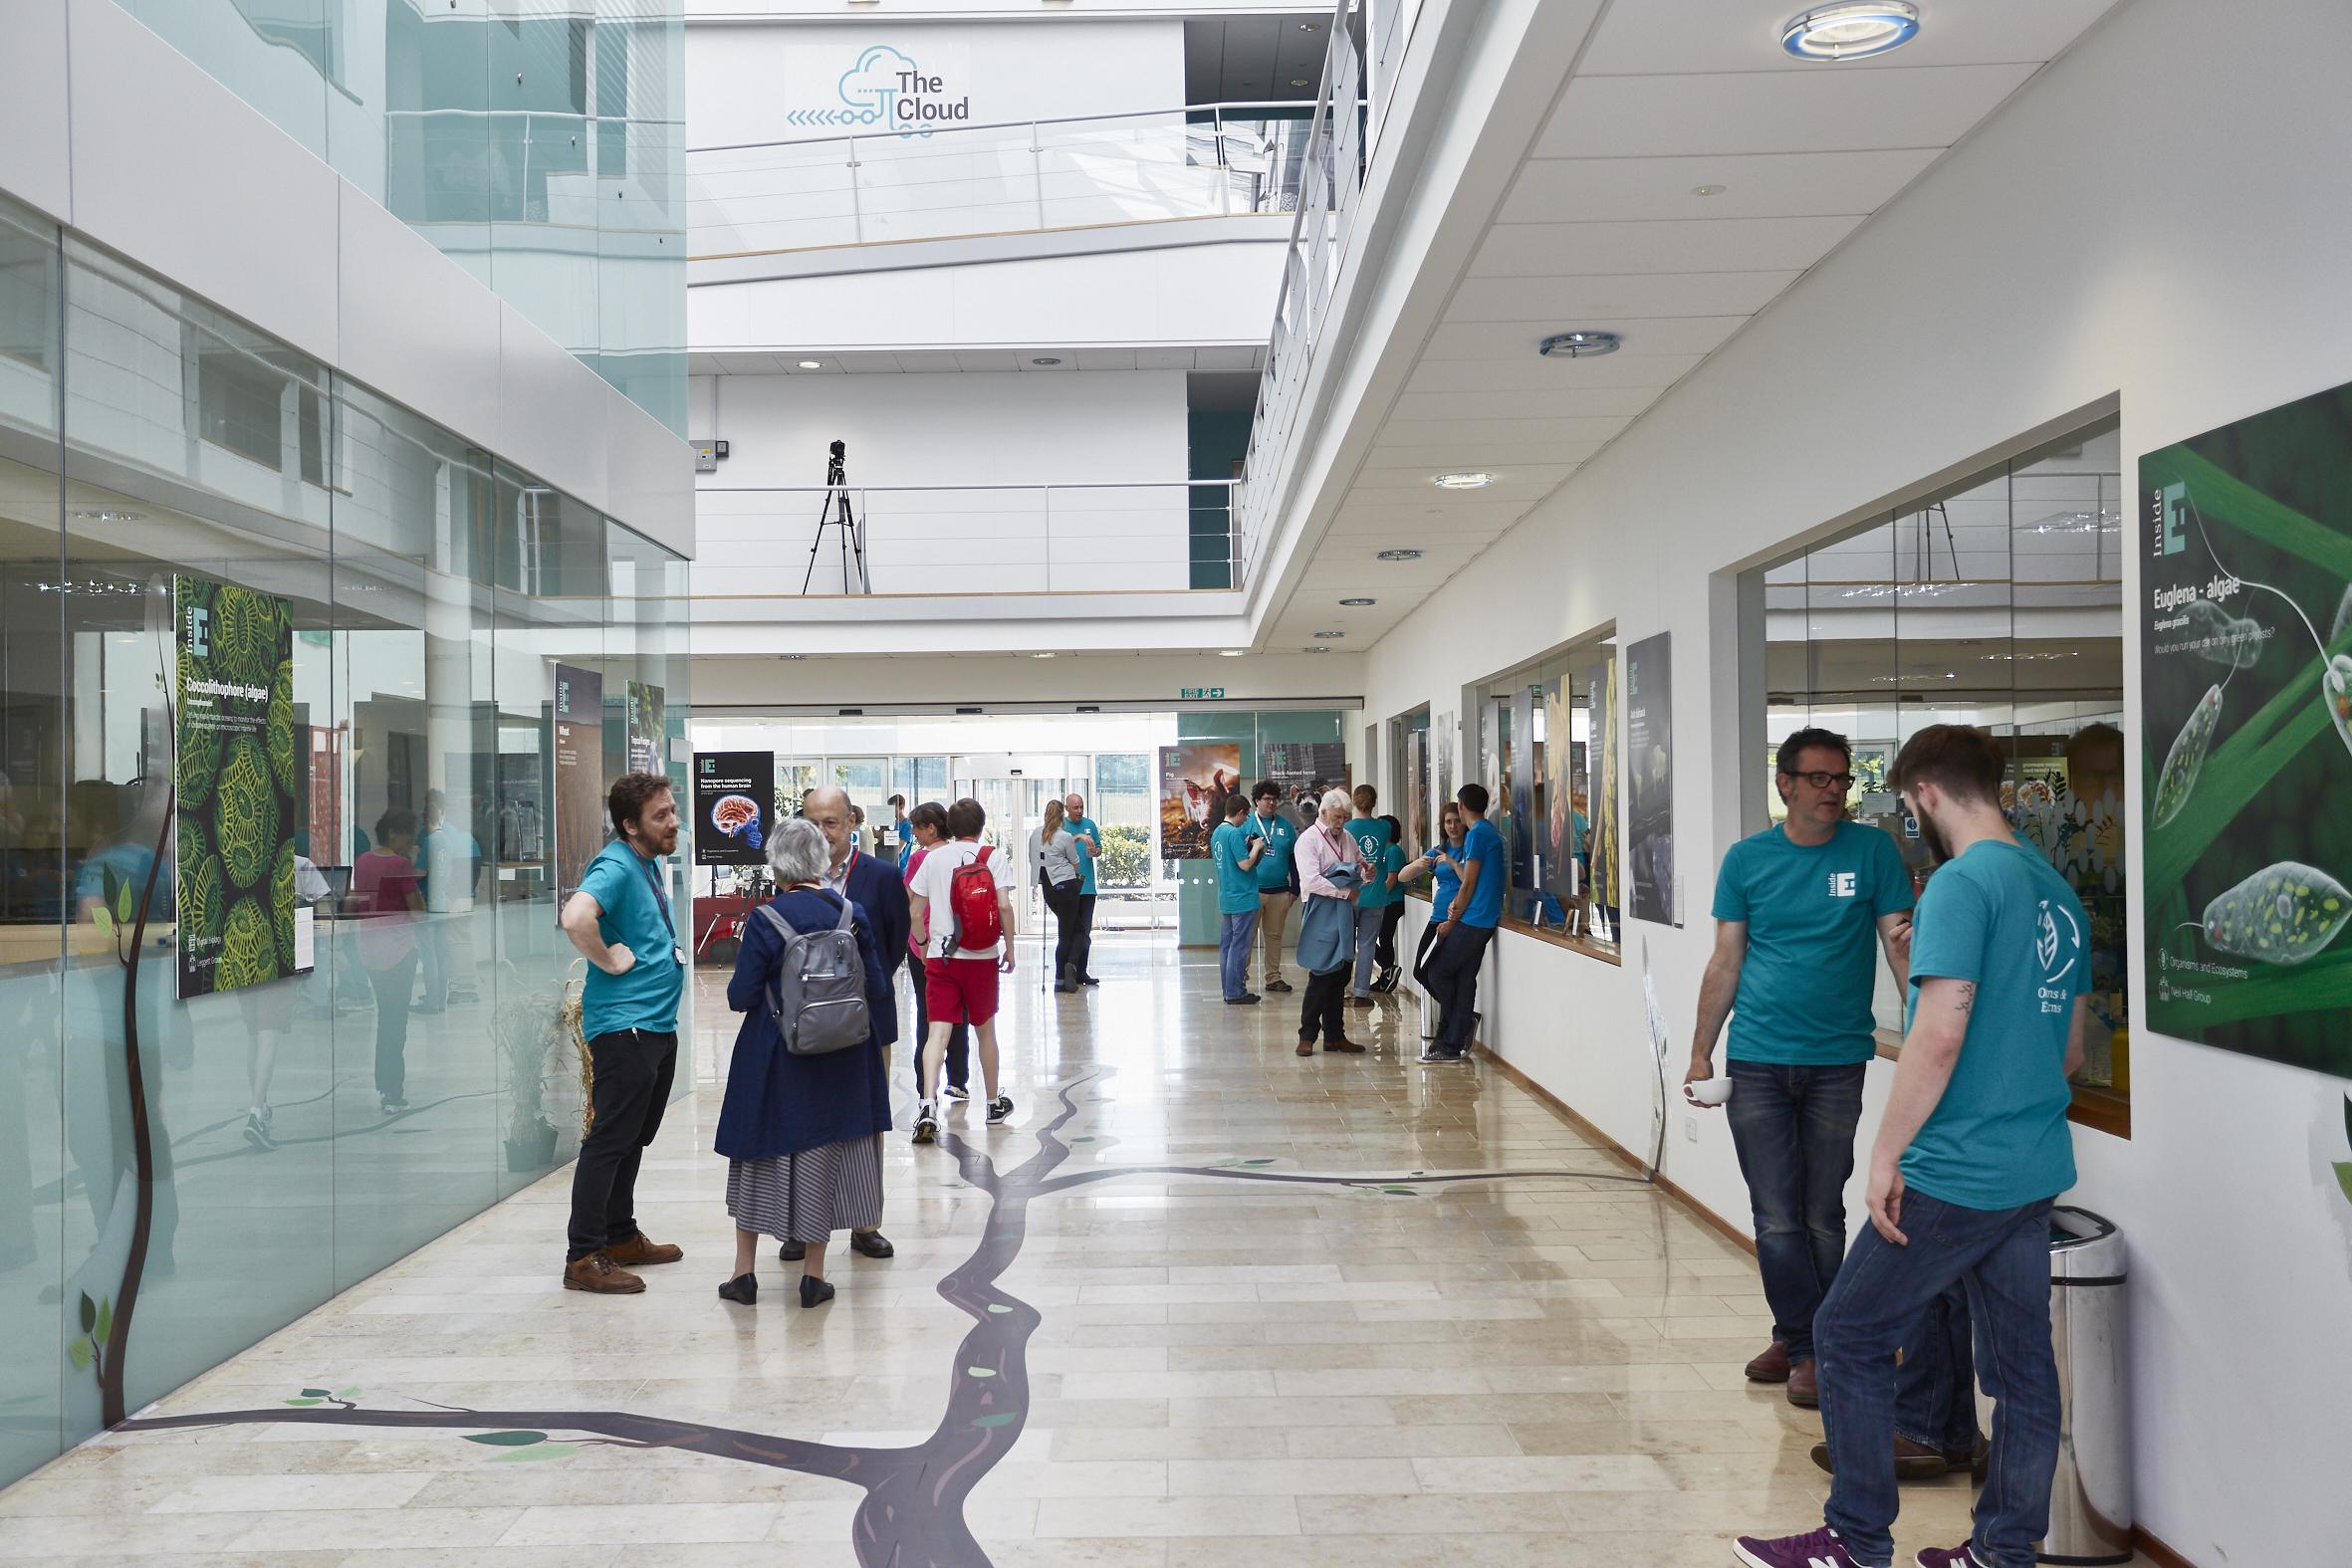 Looking across the Earlham Institute atrium during our last open day.